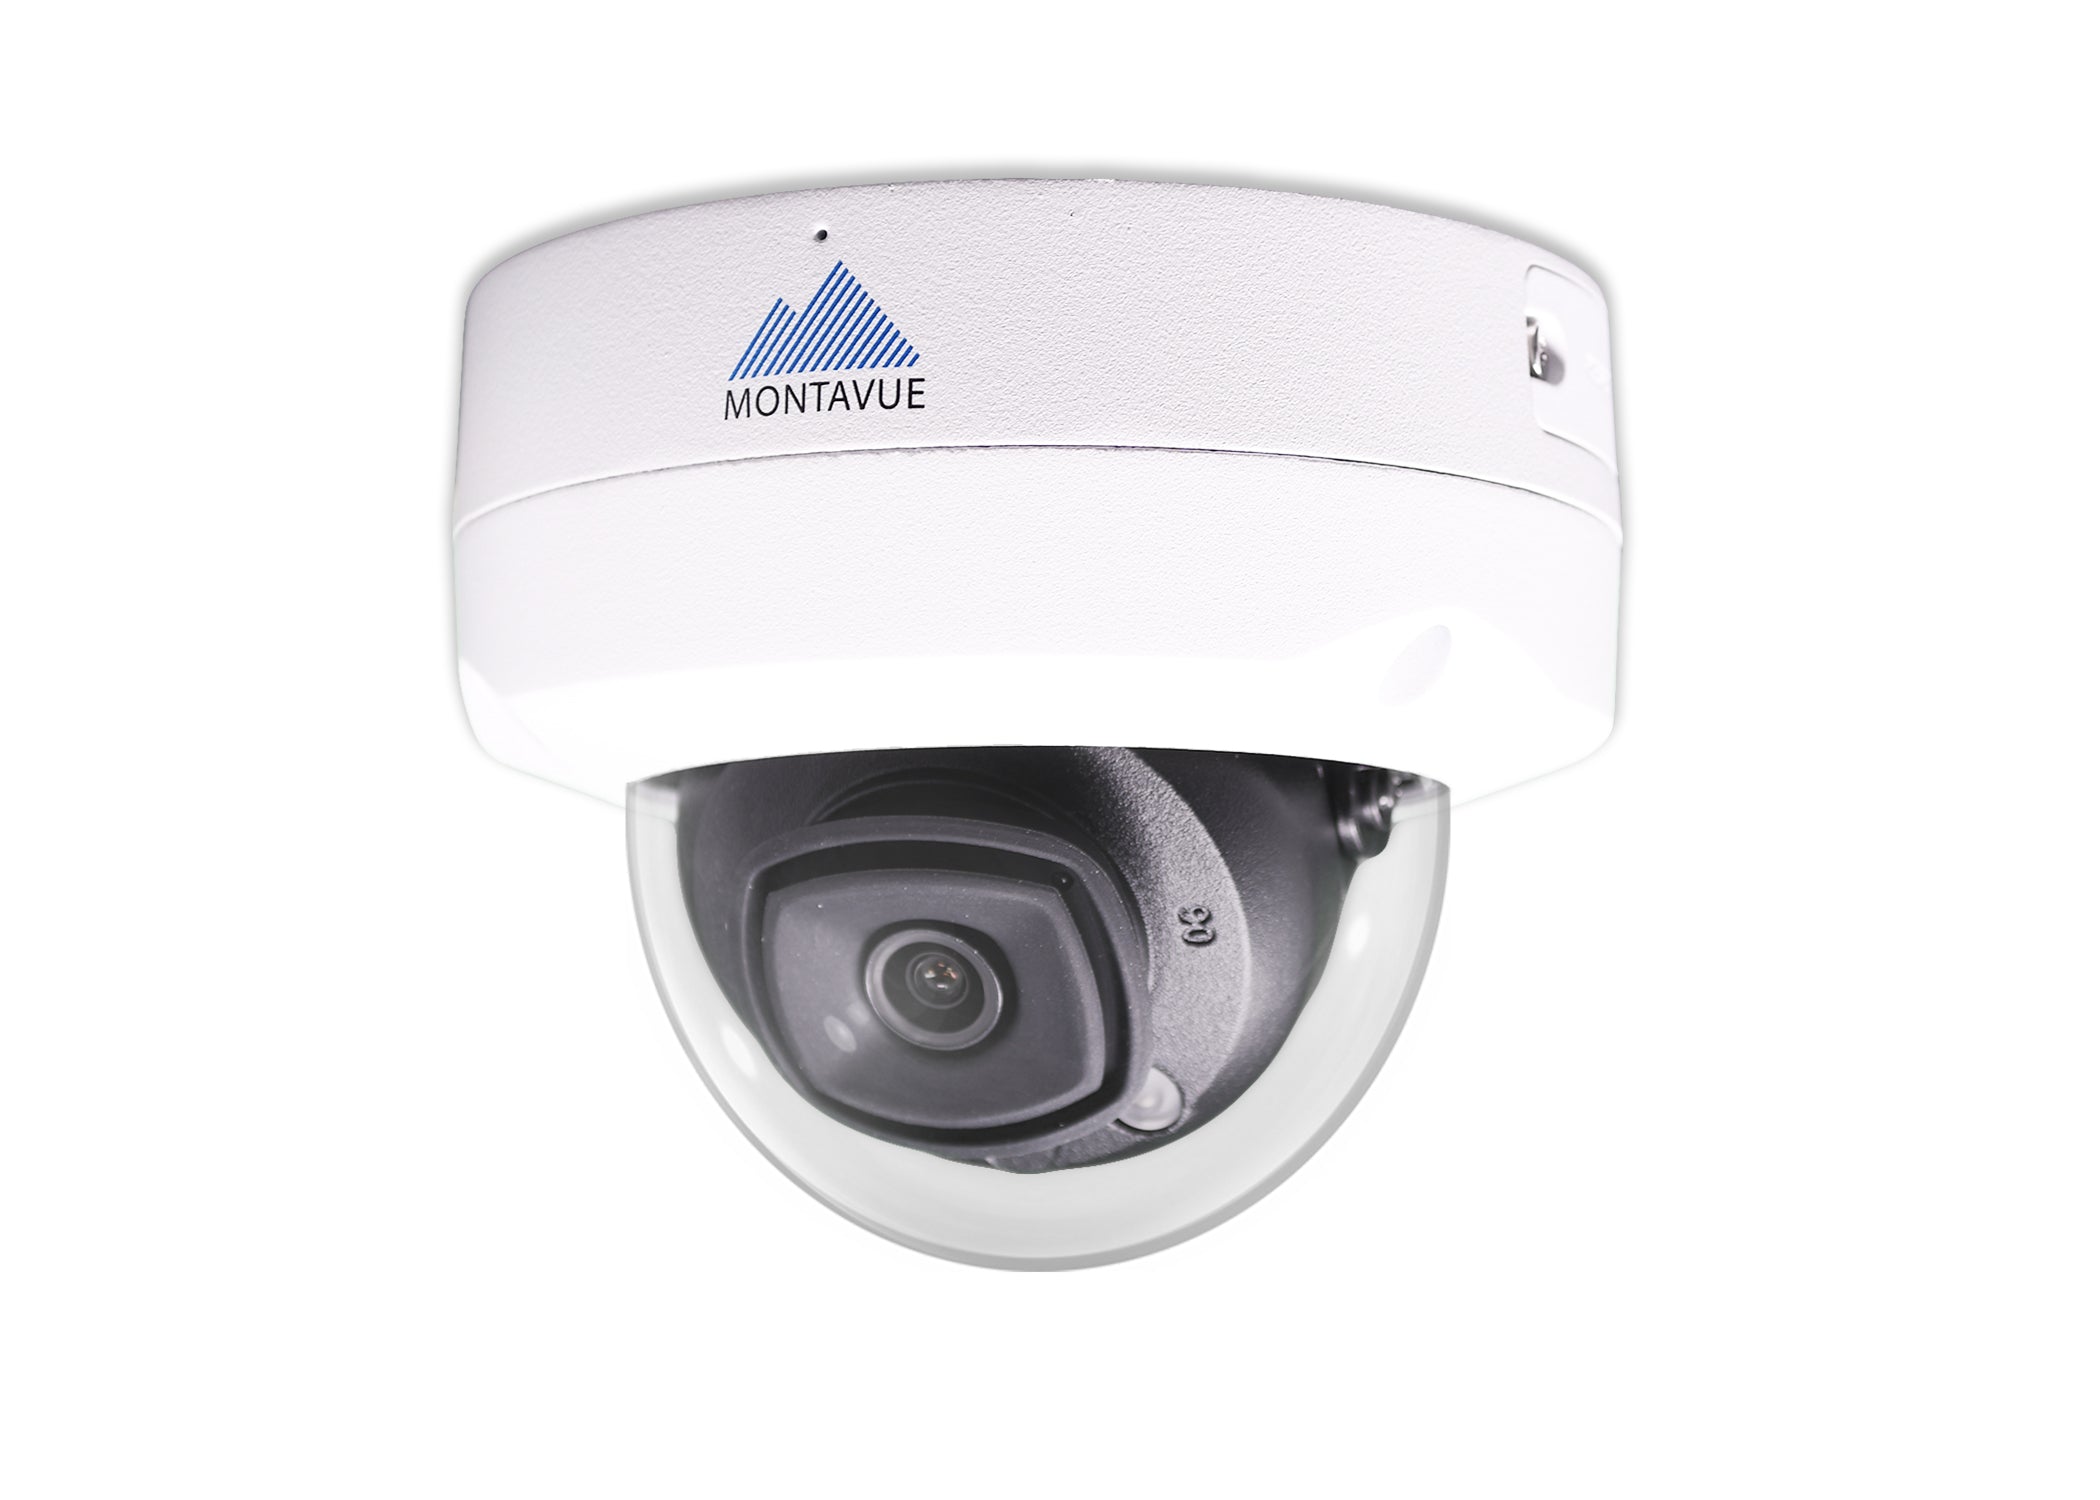 MTD8110-SMD3-AP-E | 8MP 4K 30FPS Acupick Vandal-Proof Dome Camera with ePoE and SMD 3.0 - Montavue